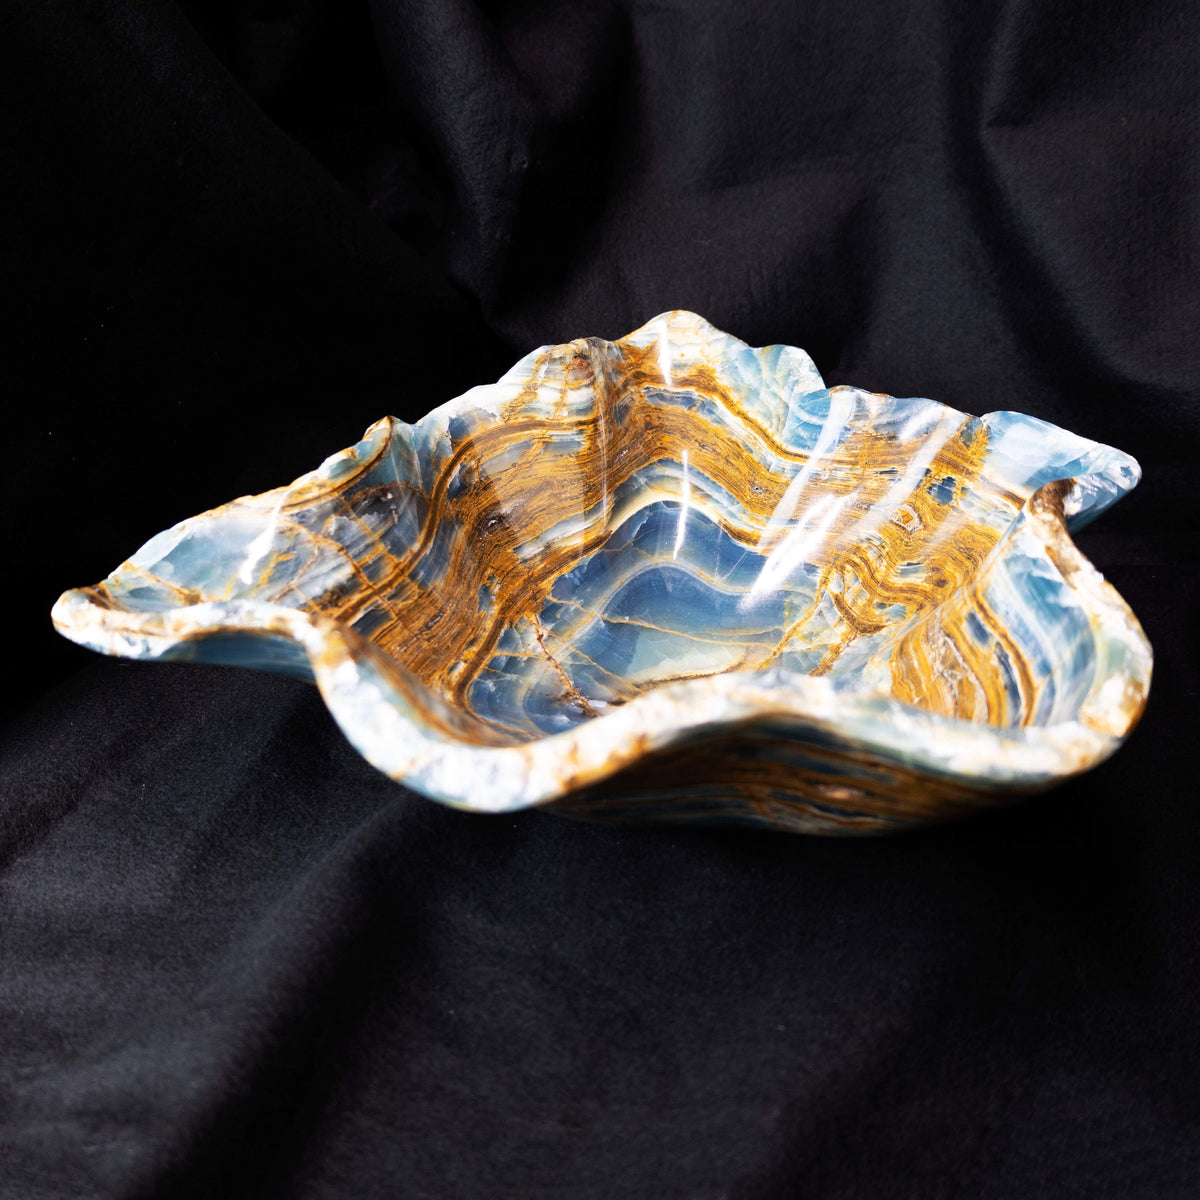 Hand-carved blue onyx bowl